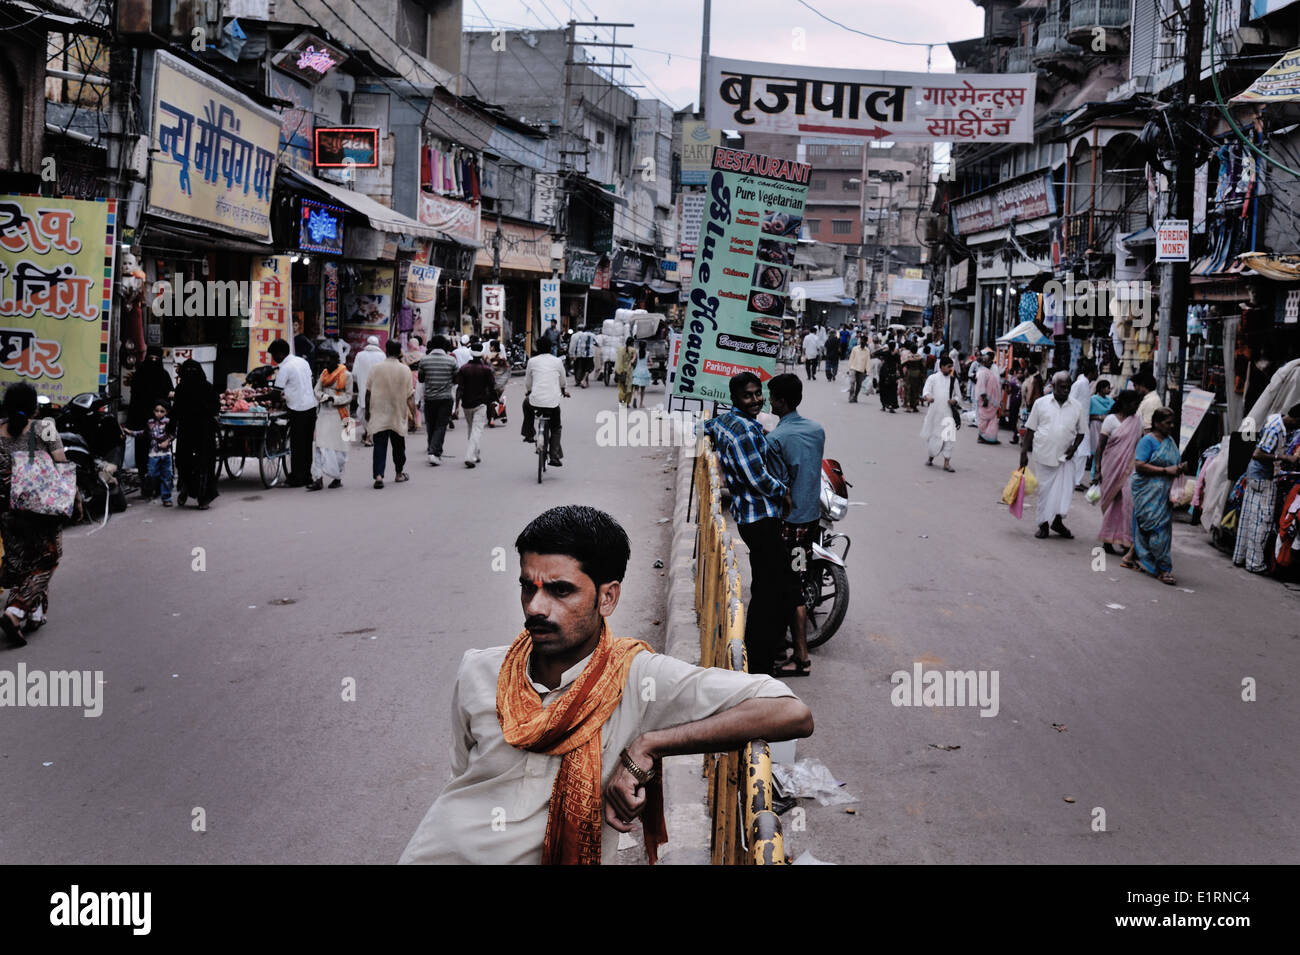 A central road in the old city of Varanasi, India 2012 Stock Photo